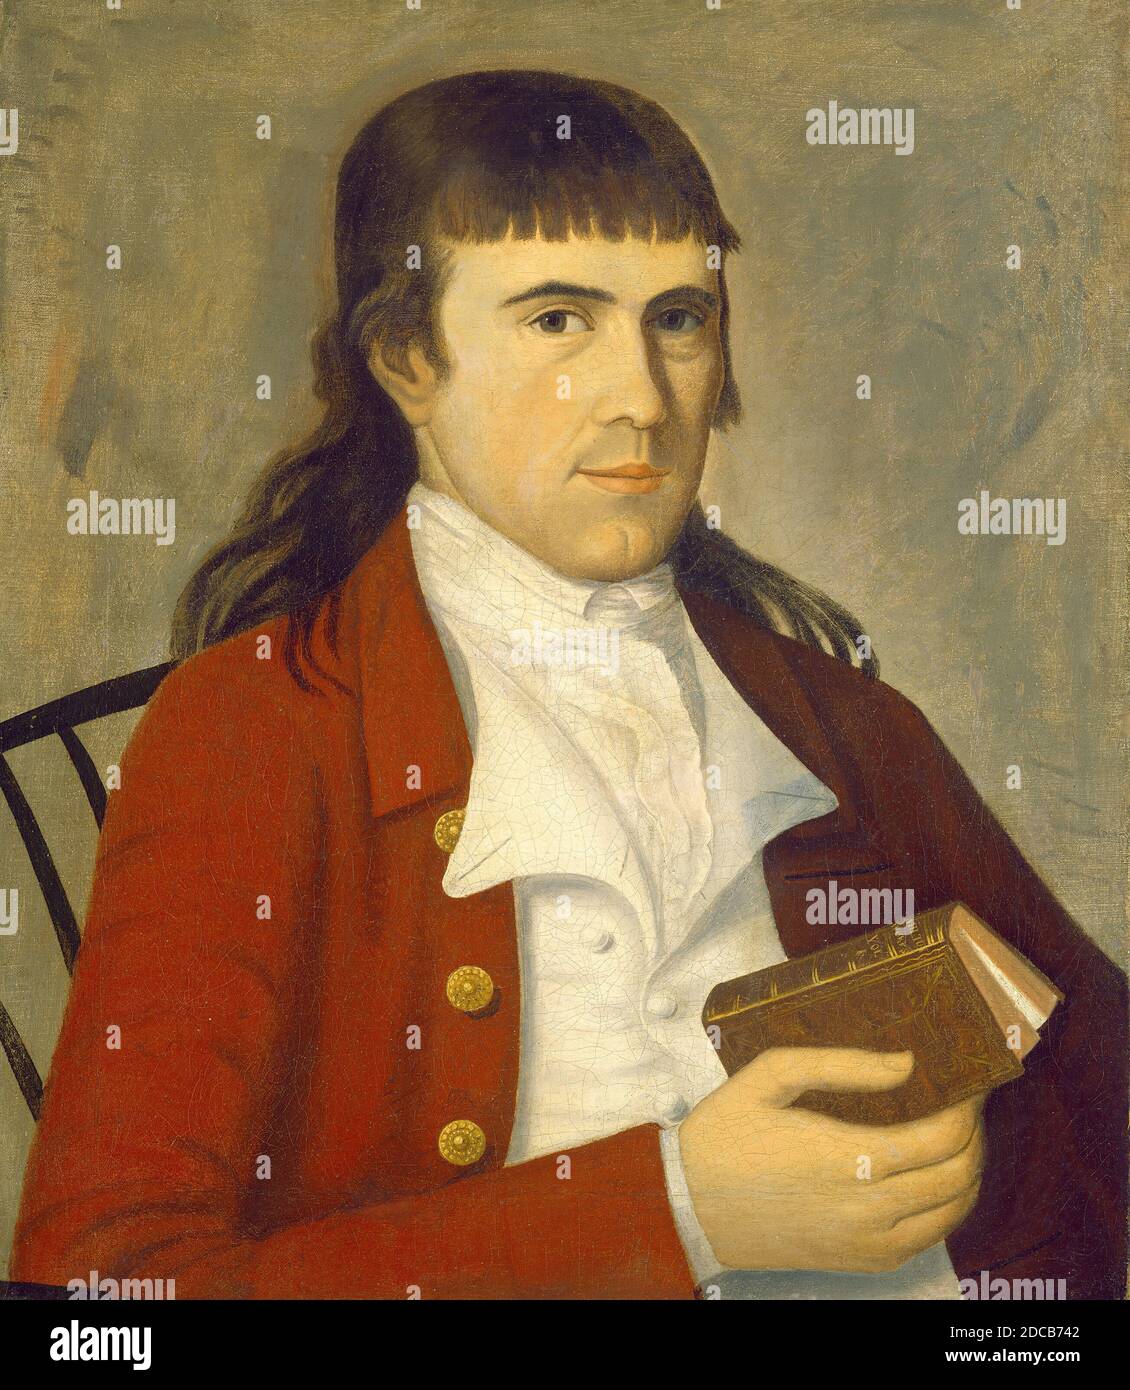 The Sherman Limner, (painter), American, active c. 1785/1790, Portrait of a Man in Red, c. 1785/1790, oil on canvas, overall: 57.2 x 49.6 cm (22 1/2 x 19 1/2 in.), framed: 63.2 x 55.3 x 4.4 cm (24 7/8 x 21 3/4 x 1 3/4 in Stock Photo